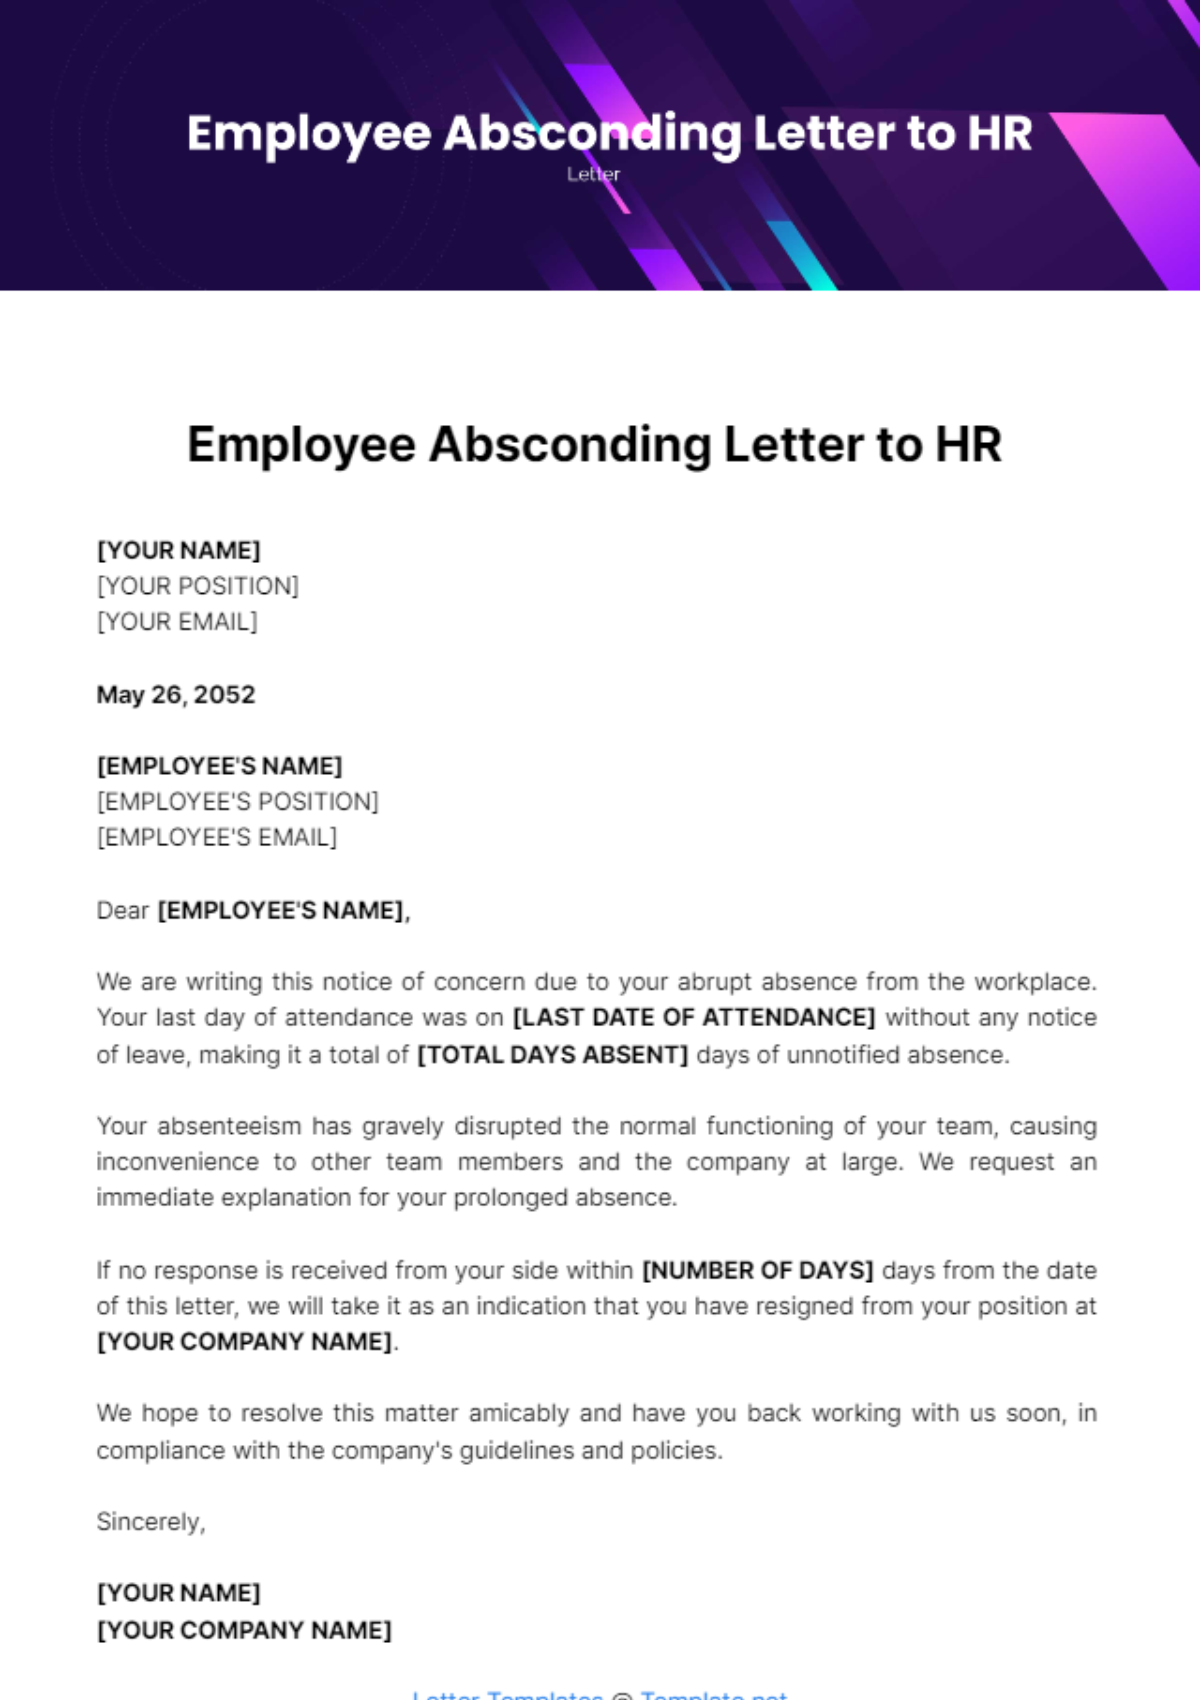 Free Employee Absconding Letter to HR Template